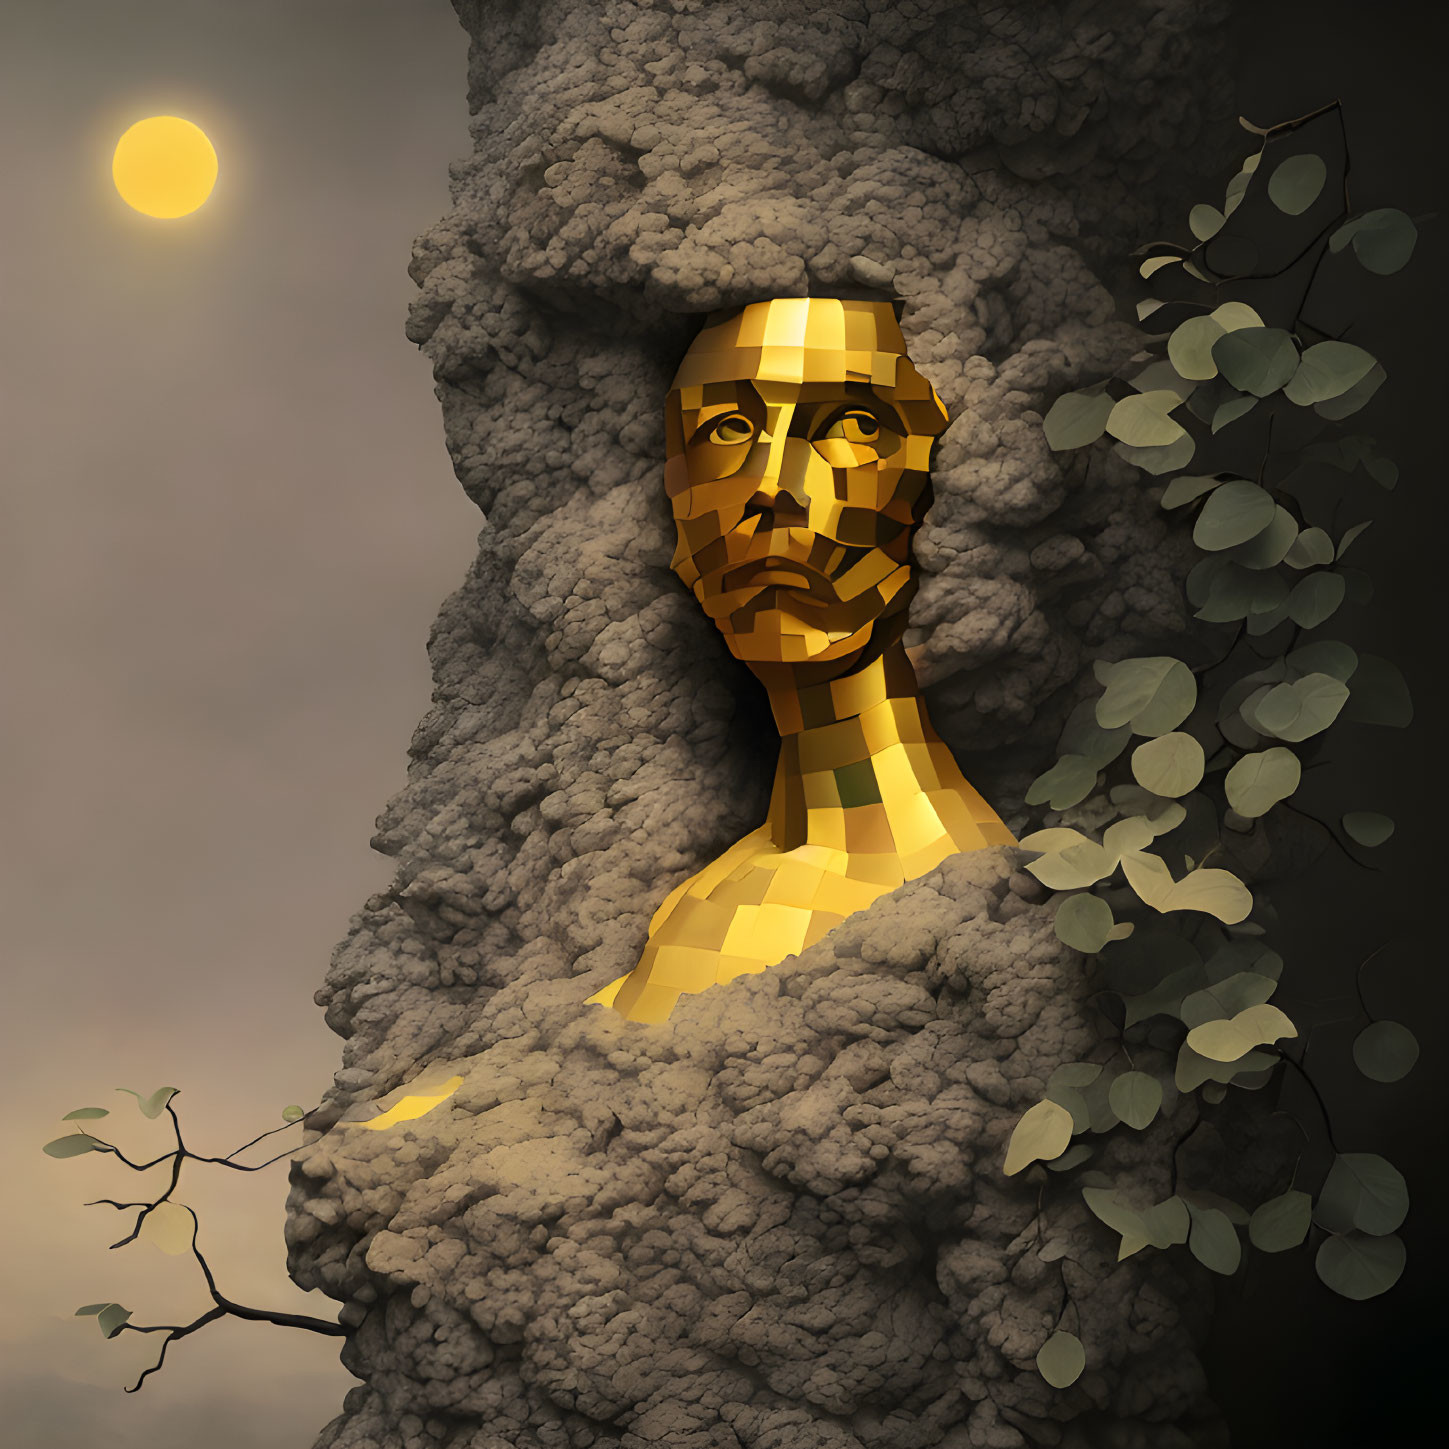 Golden Human Face Sculpture Emerging from Grey Rock with Vines